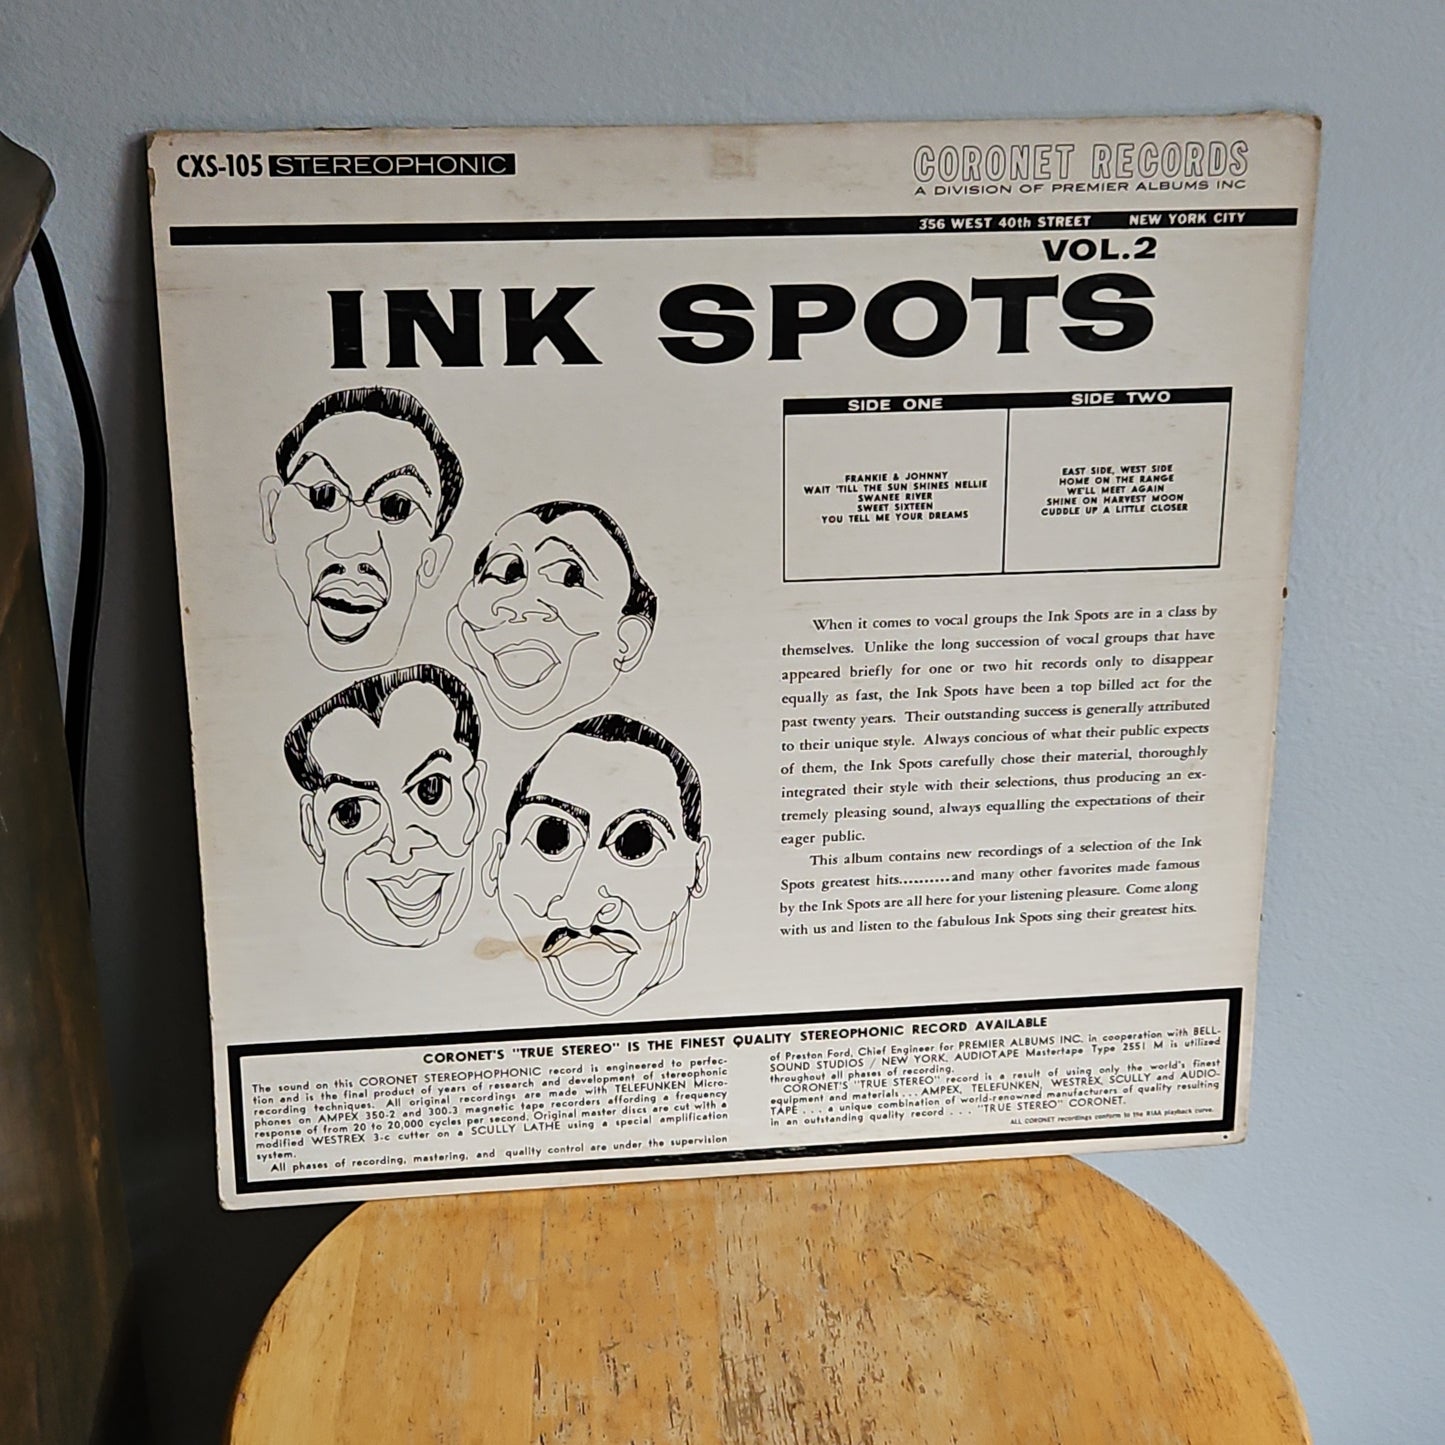 The Ink Spots The Second Album of Hits By Coronet Records